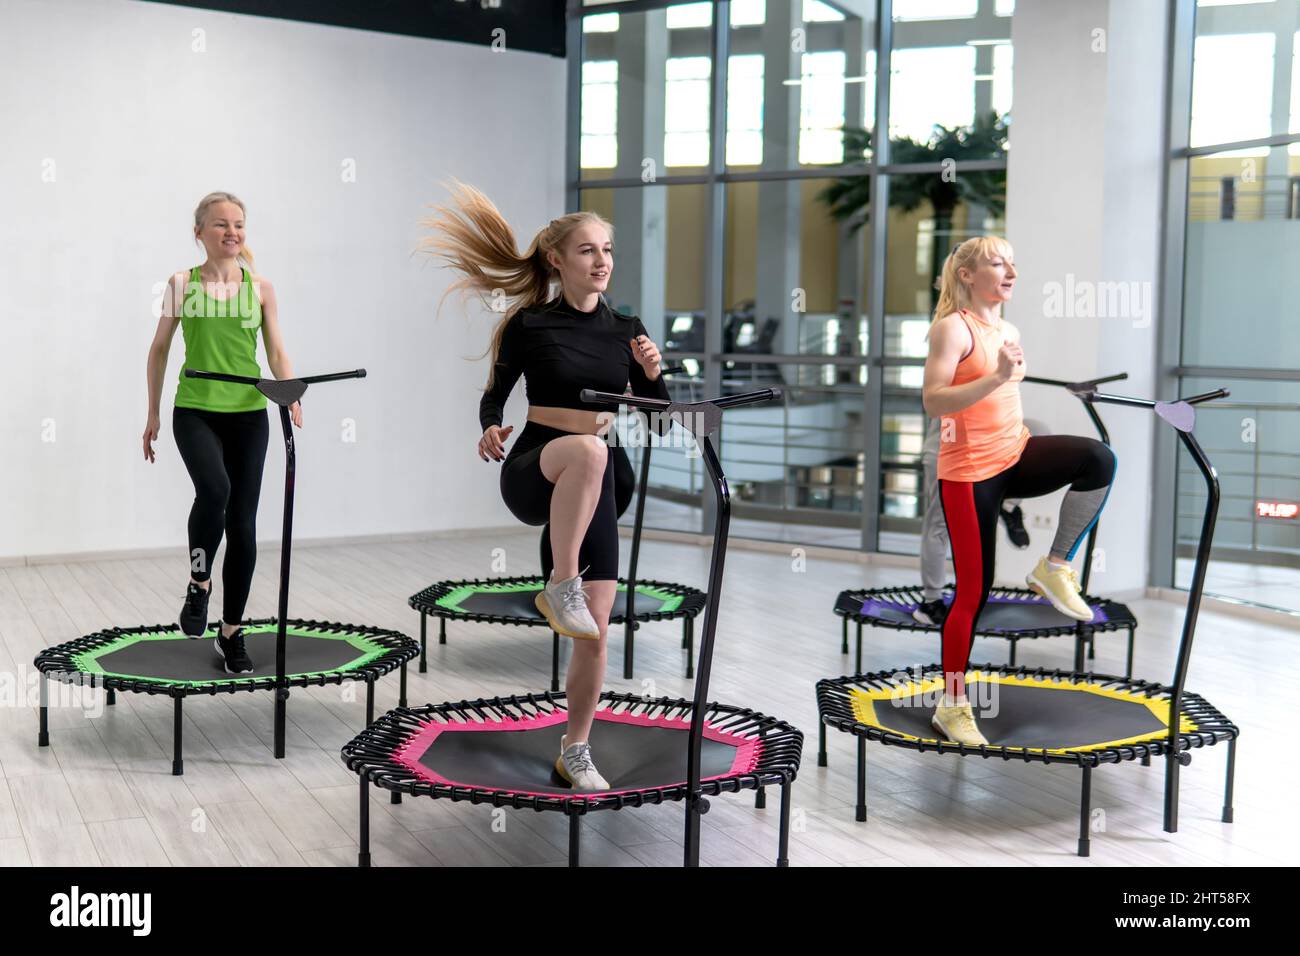 Page 2 - Trampoline Woman High Resolution Stock Photography and Images -  Alamy